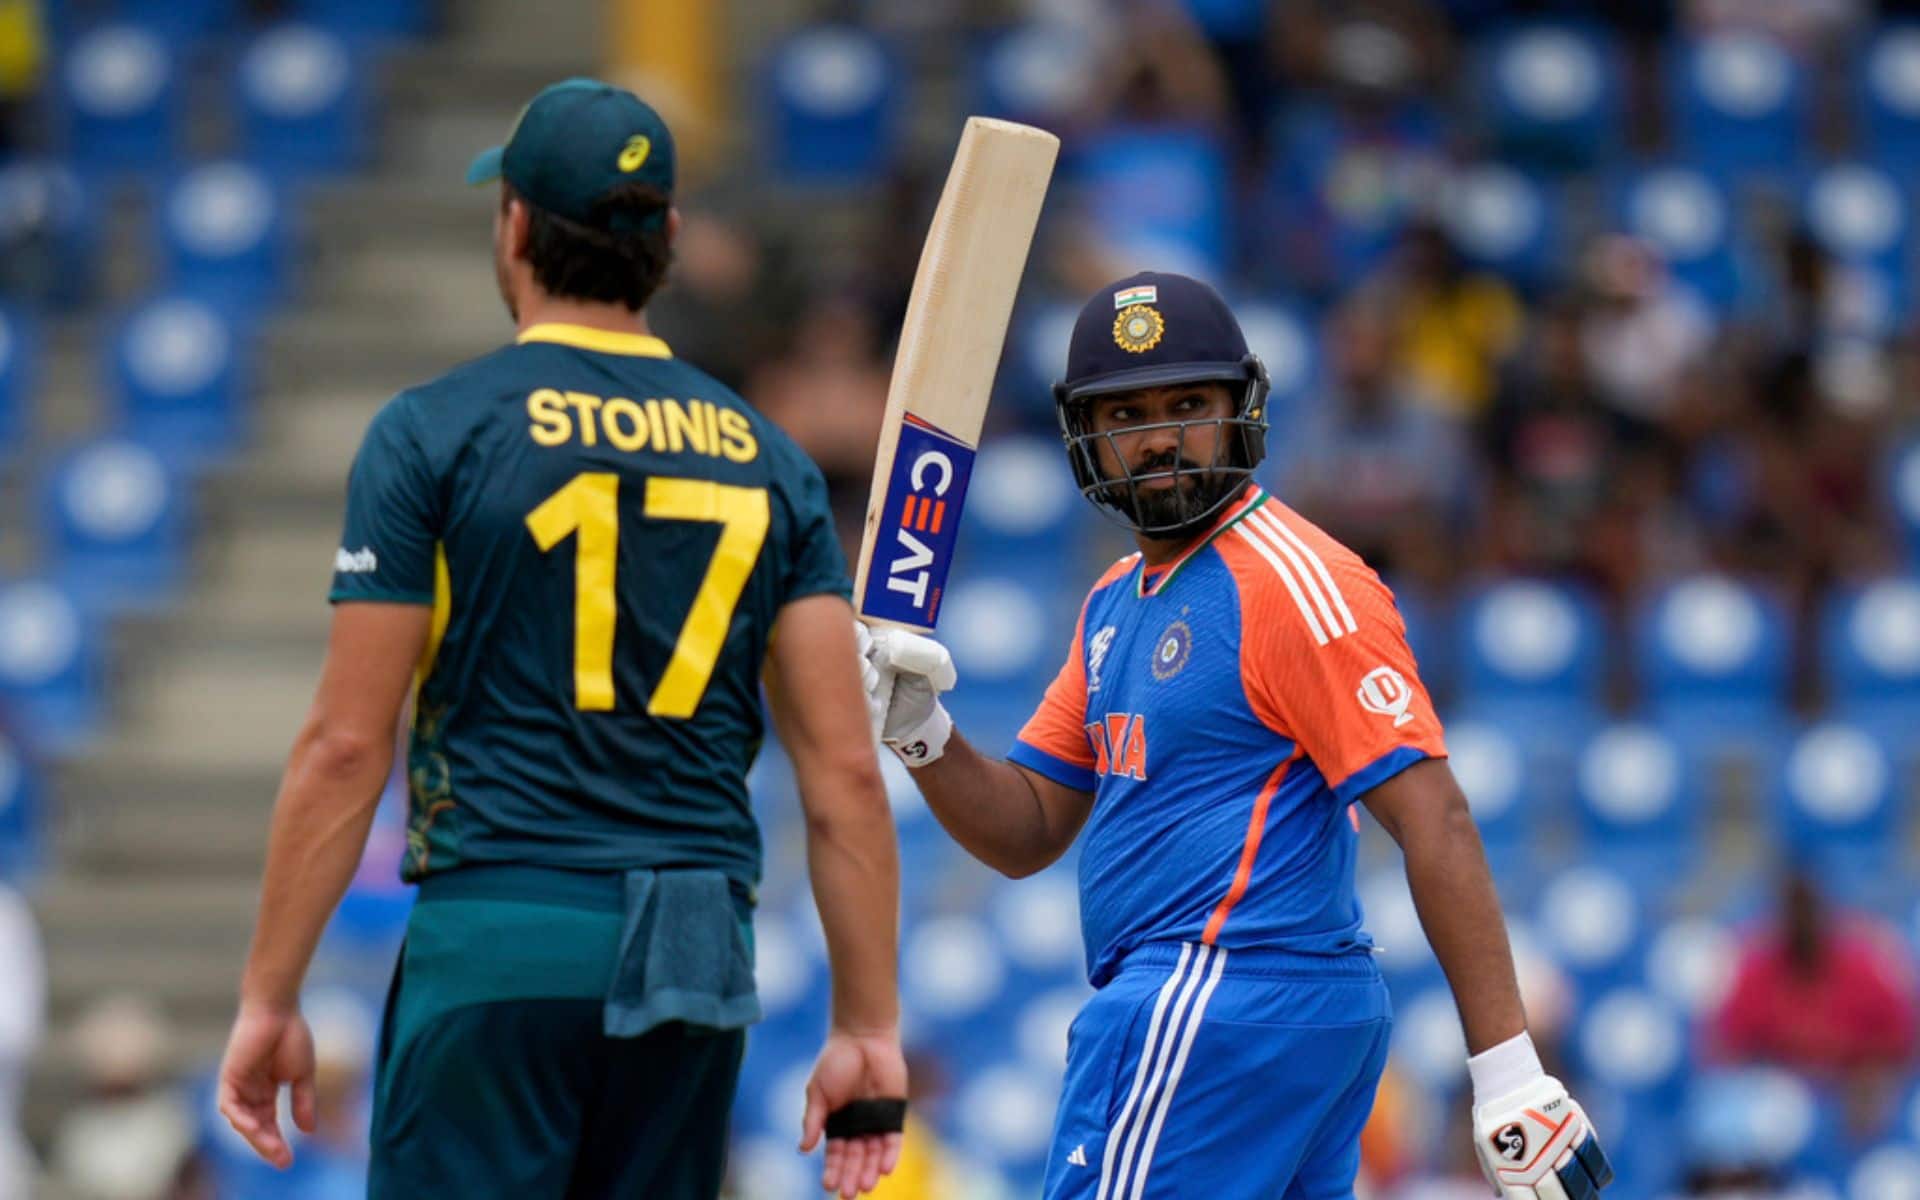 Rohit Sharma after scoring his fifty vs AUS (AP Photo)